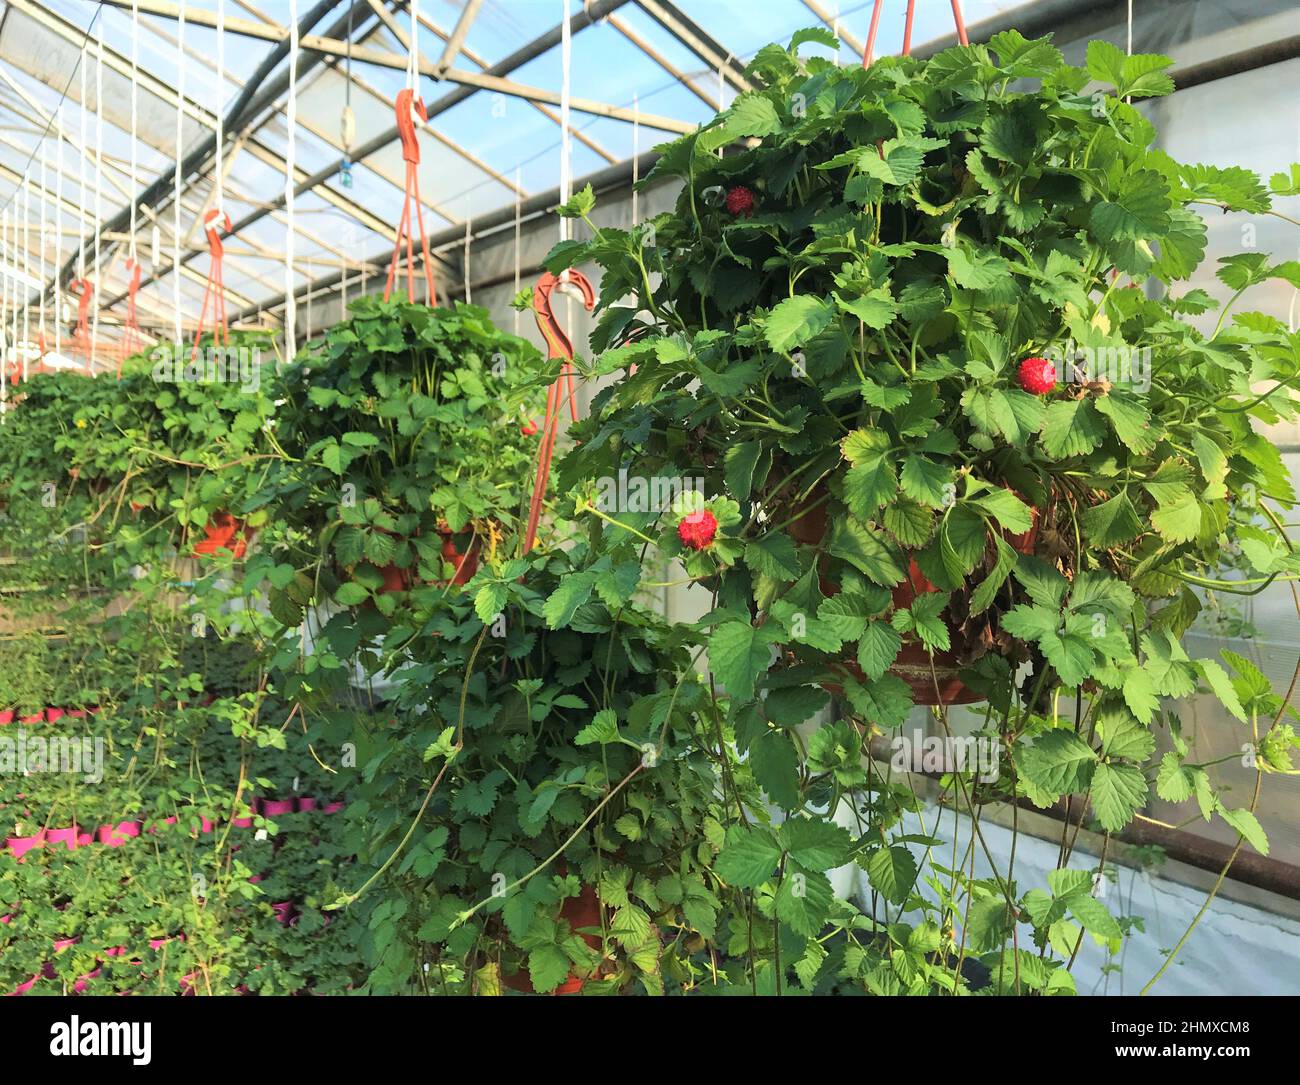 In the greenhouse hanging pot with flowering and fruiting false strawberries Potentilla indica, with large red berries and yellow flowers. Stock Photo